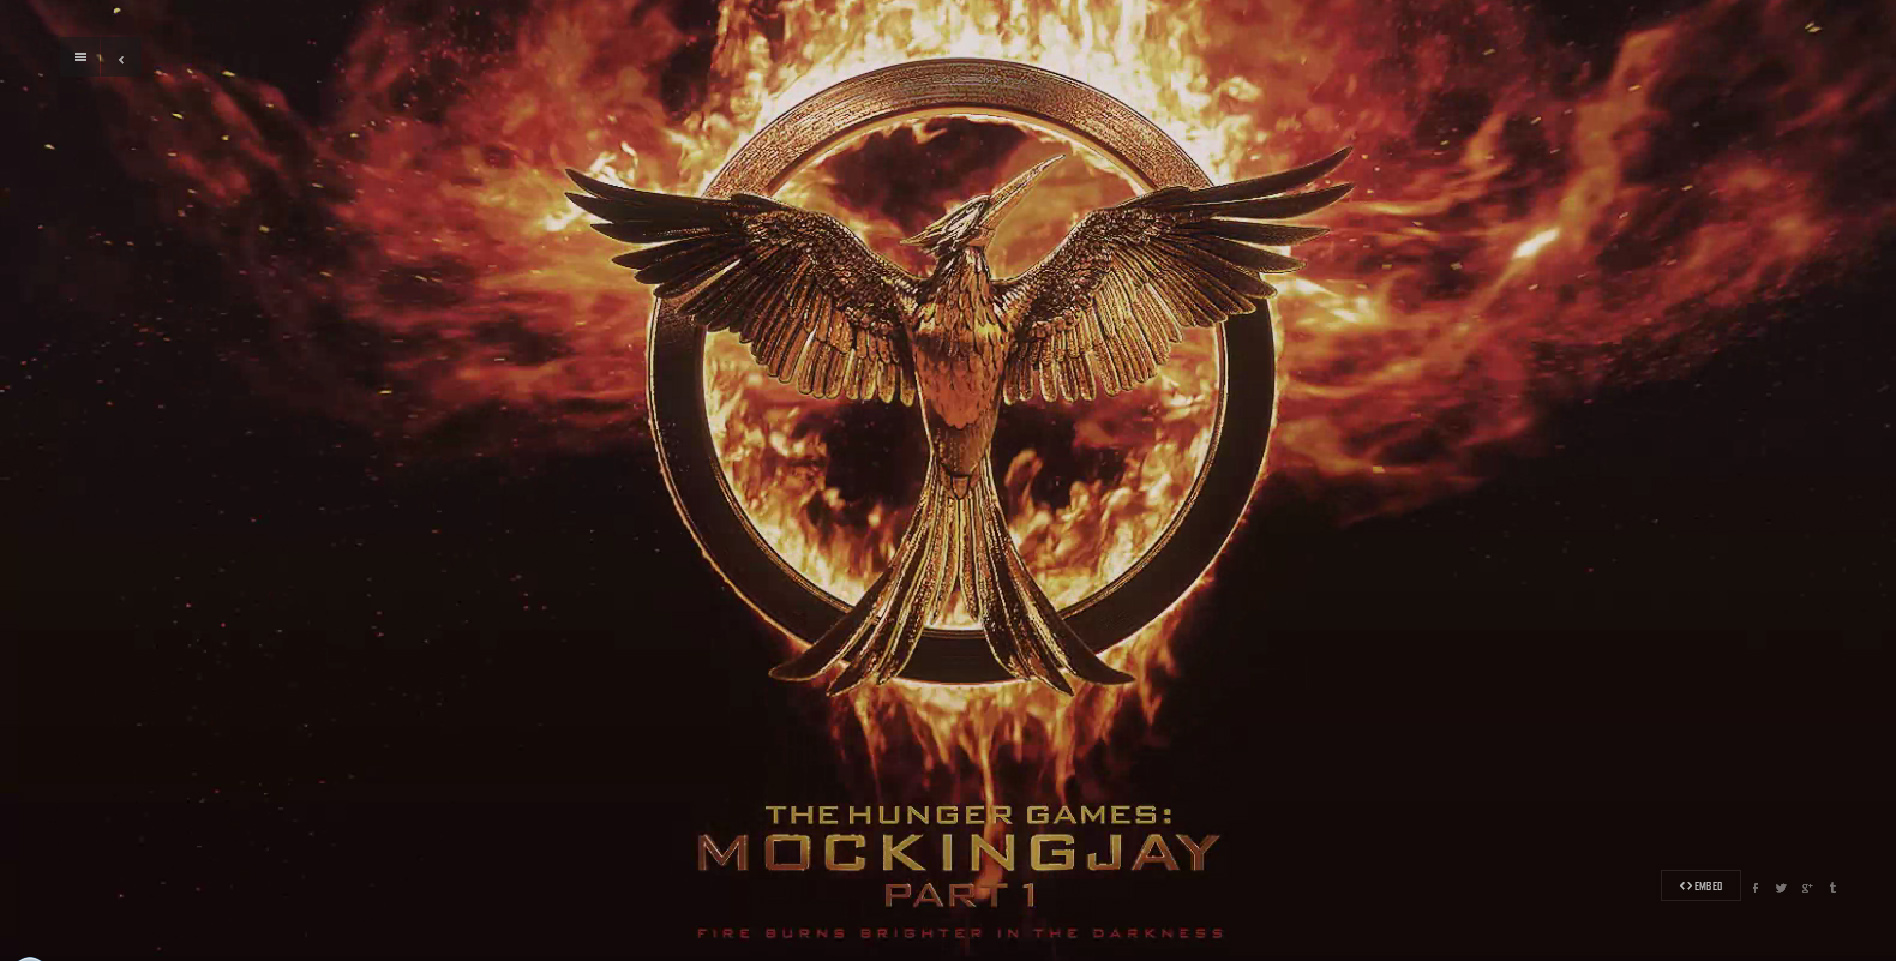 The Hunger Games: Mockingjay - Part 1 #2